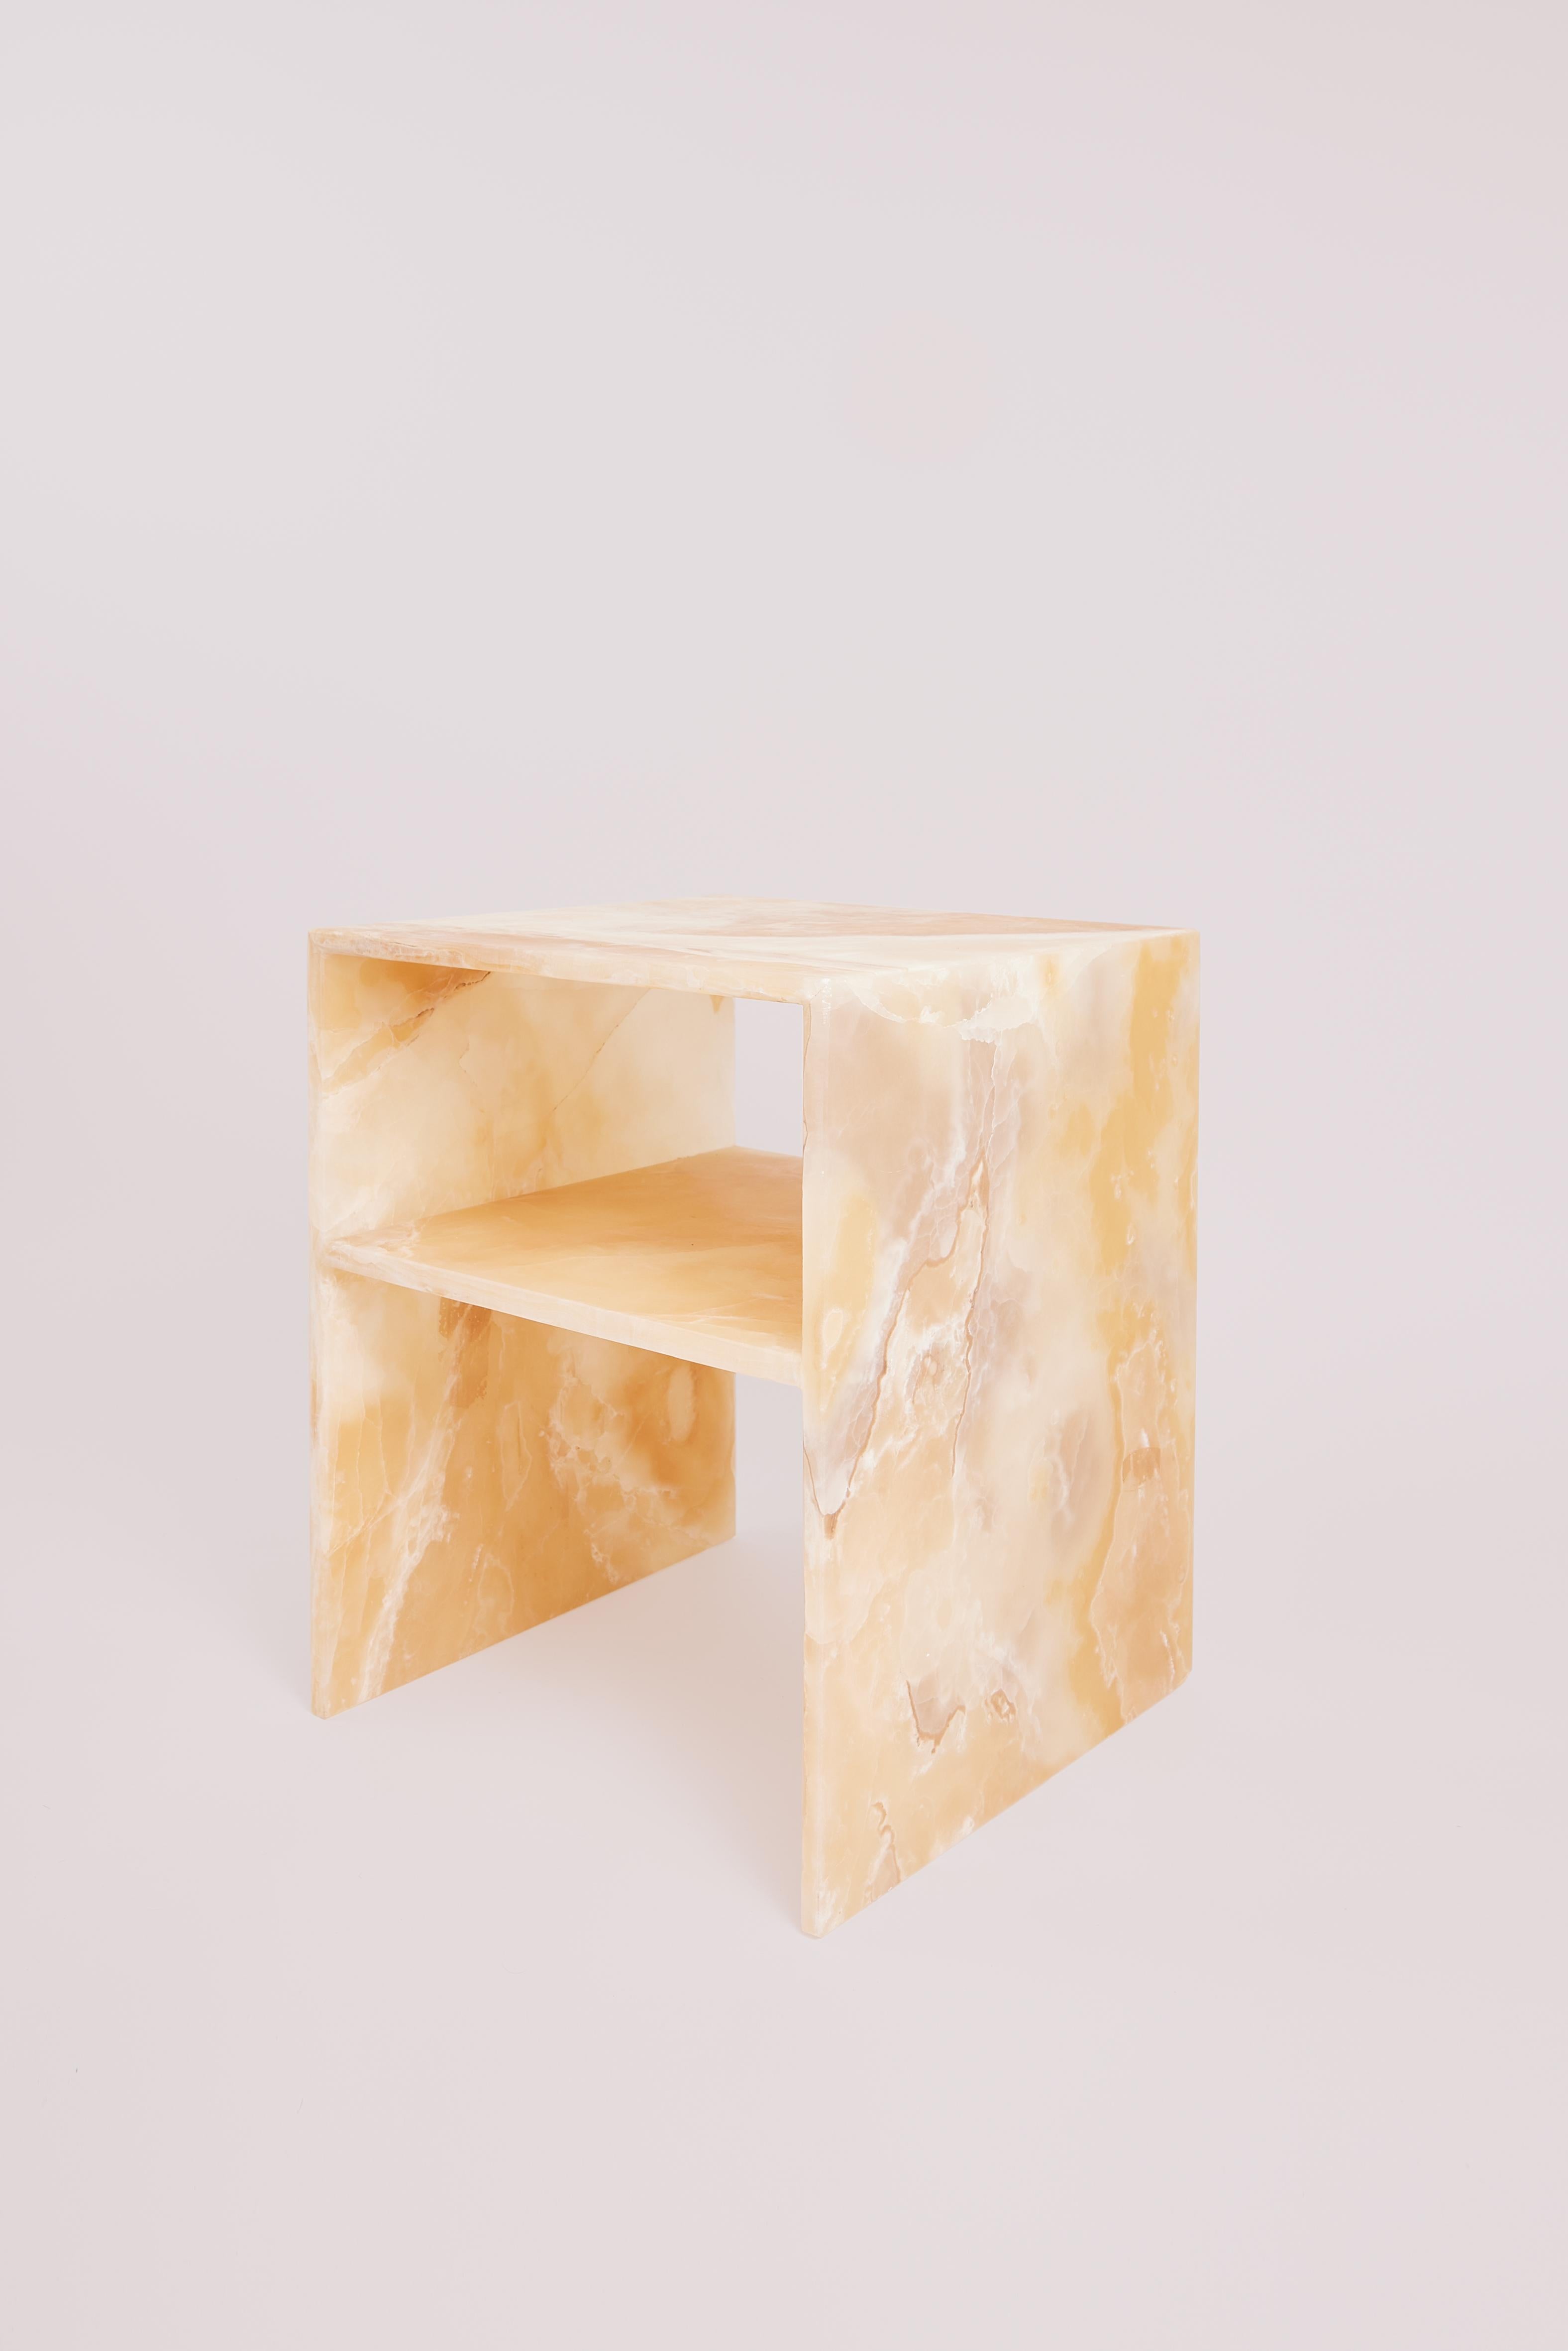 Amber Onyx Rosa Bedside Table by Studio Gaia Paris
Dimensions: W 40 x D 40 x H 50 cm
Materials: Amber Onyx

The Rosa table is a bedside table, a side table or an end table.

It is made from exotic onyx known for its beauty and color variations.
Each